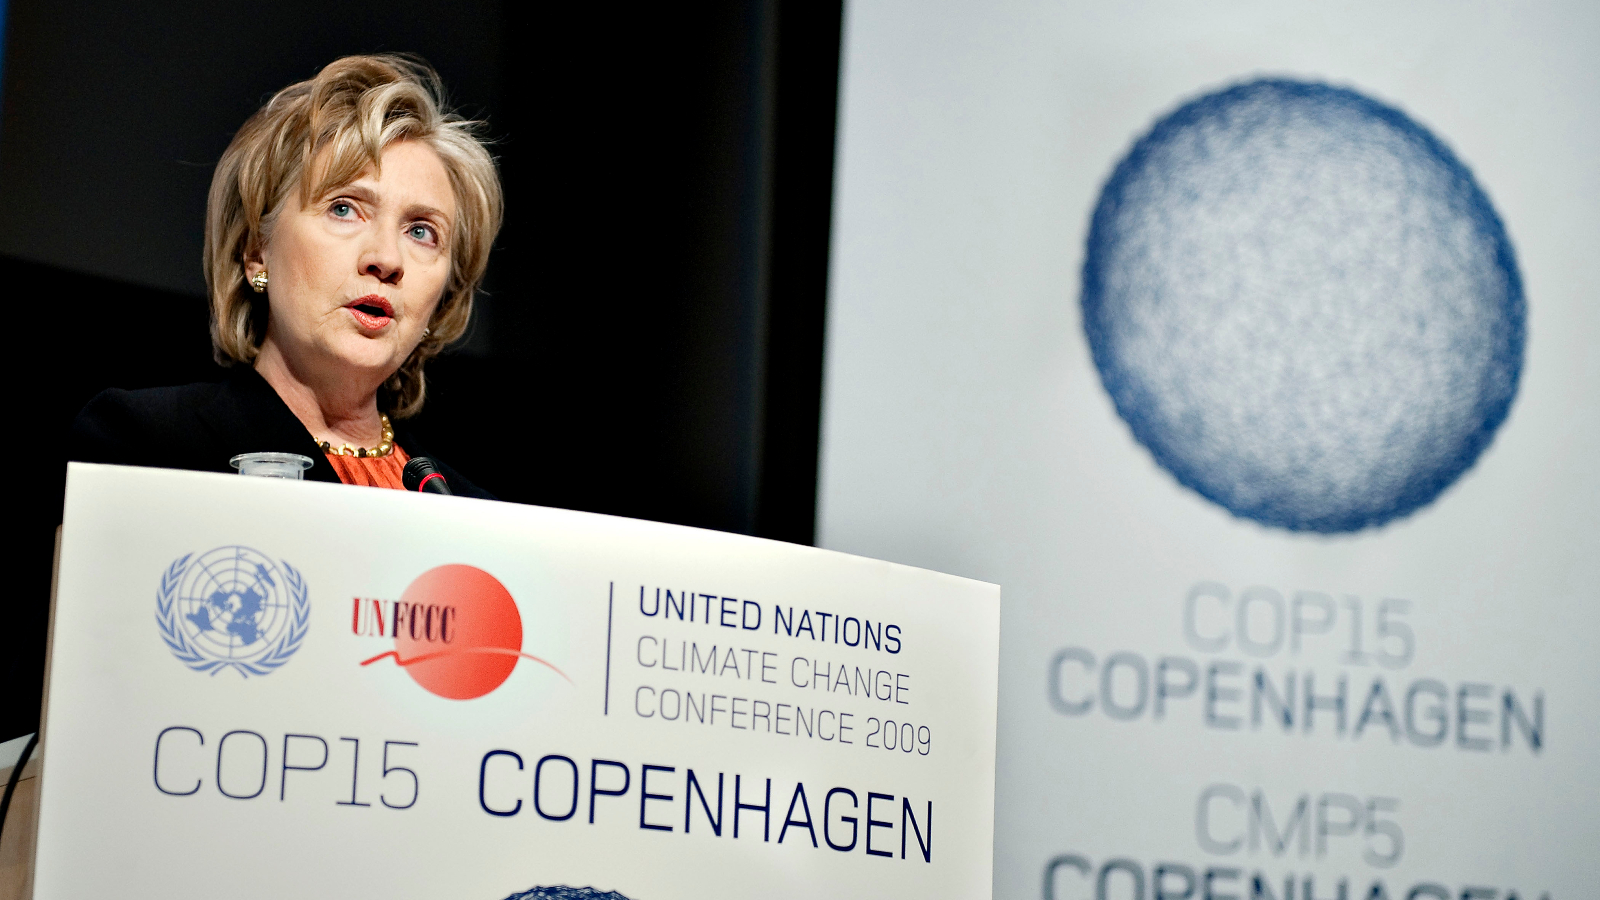 US Secretary of State Hillary Rodham Clinton gives a press conference at the Bella Center in Copenhagen on December 17, 2009 on the 11th day of the COP15 UN Climate Change Conference.